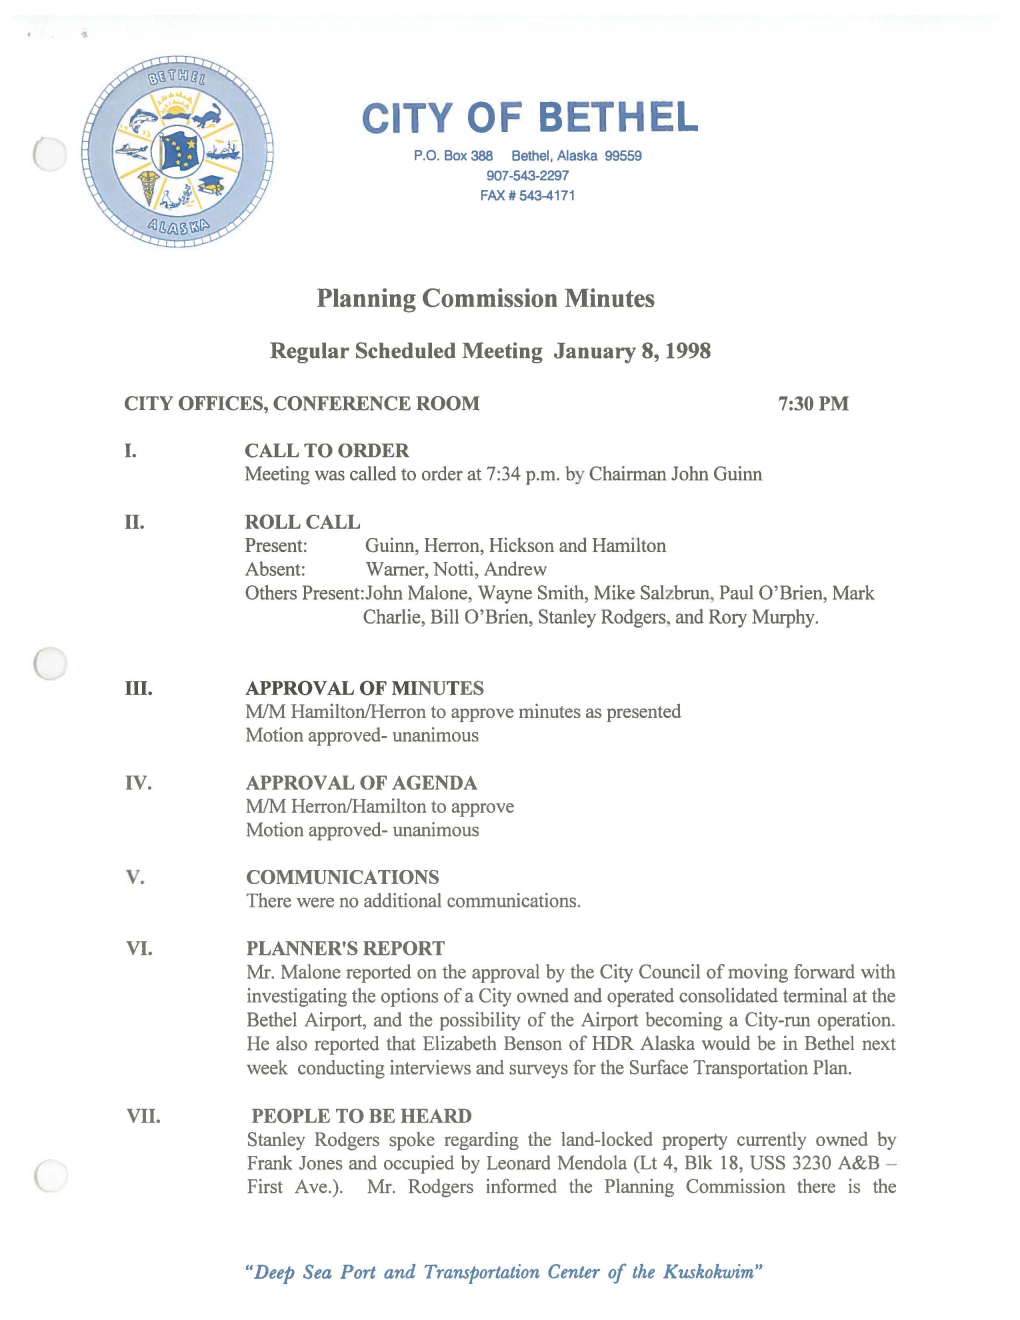 Planning Commission Meeting Minutes